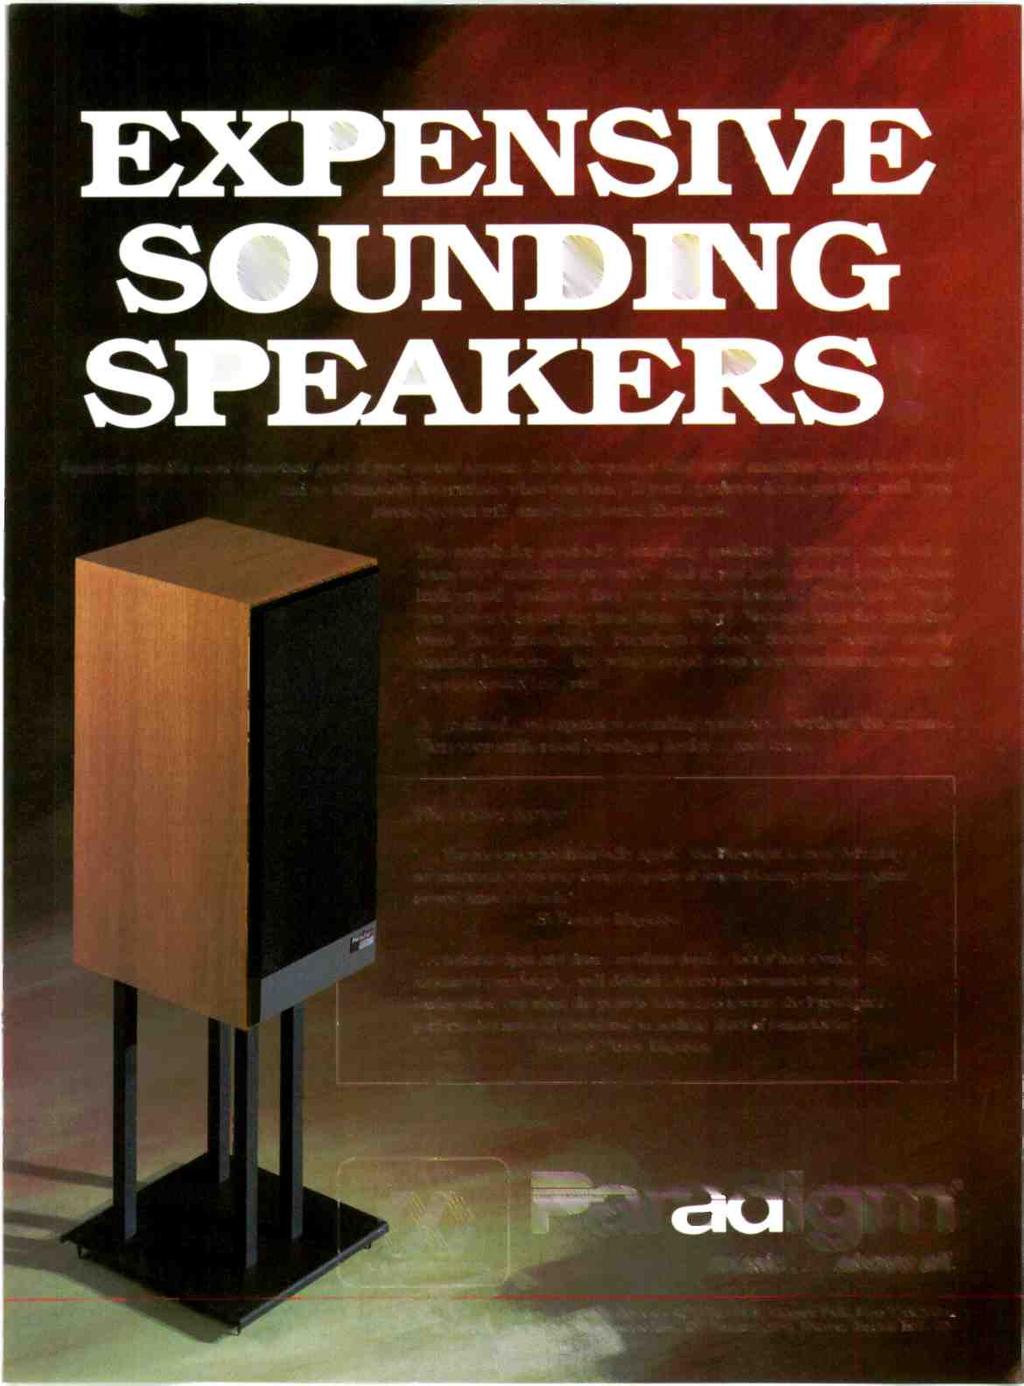 EXPENSIVE SOUNDING SPEAKERS! Speakers are the most important part of your stereo system. It is the speaker that turns amplifier signal into sound and so ultimately determines what you hear.